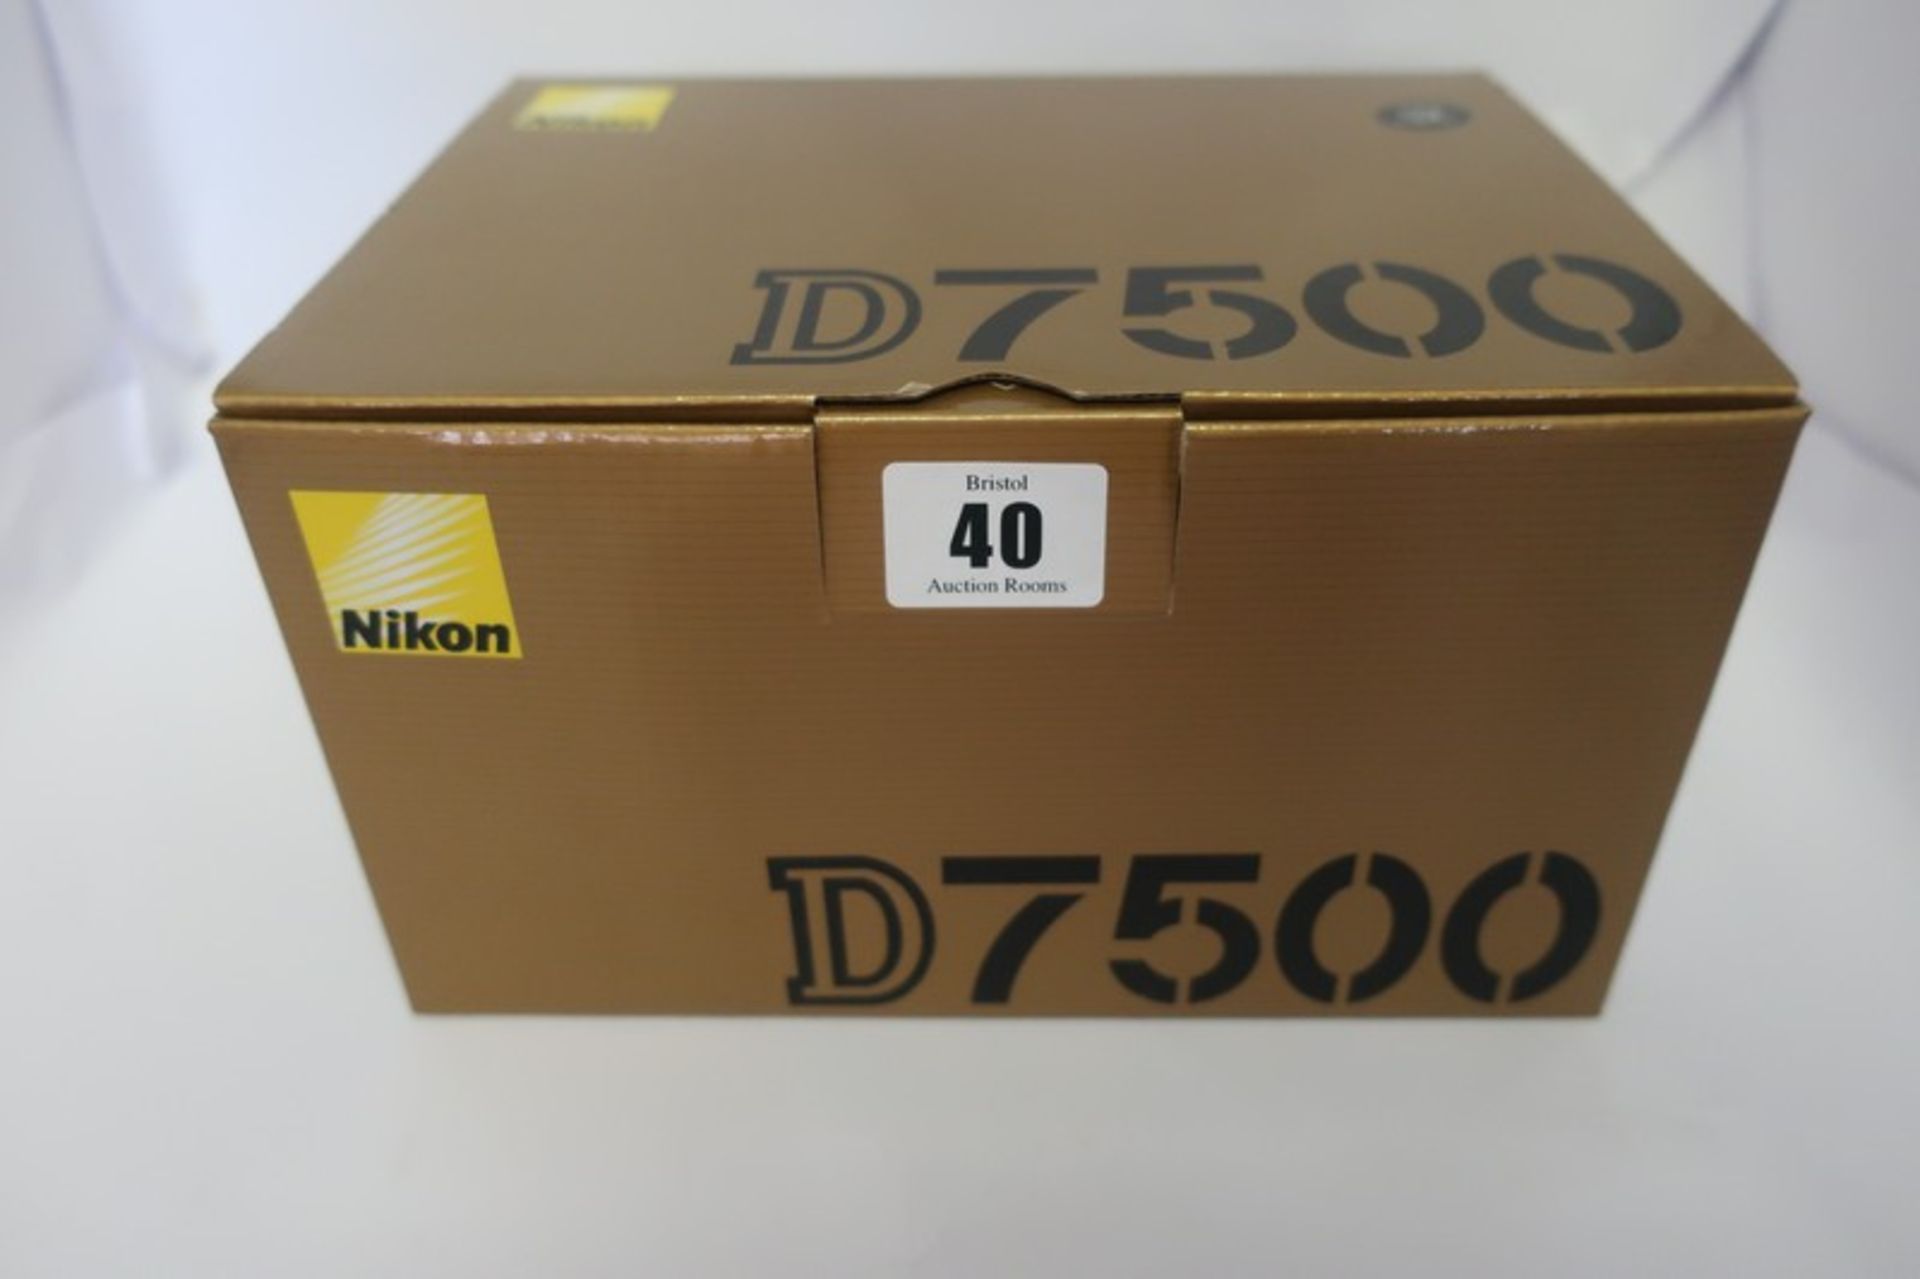 A boxed as new Nikon D7500 digital SLR camera (Body only).